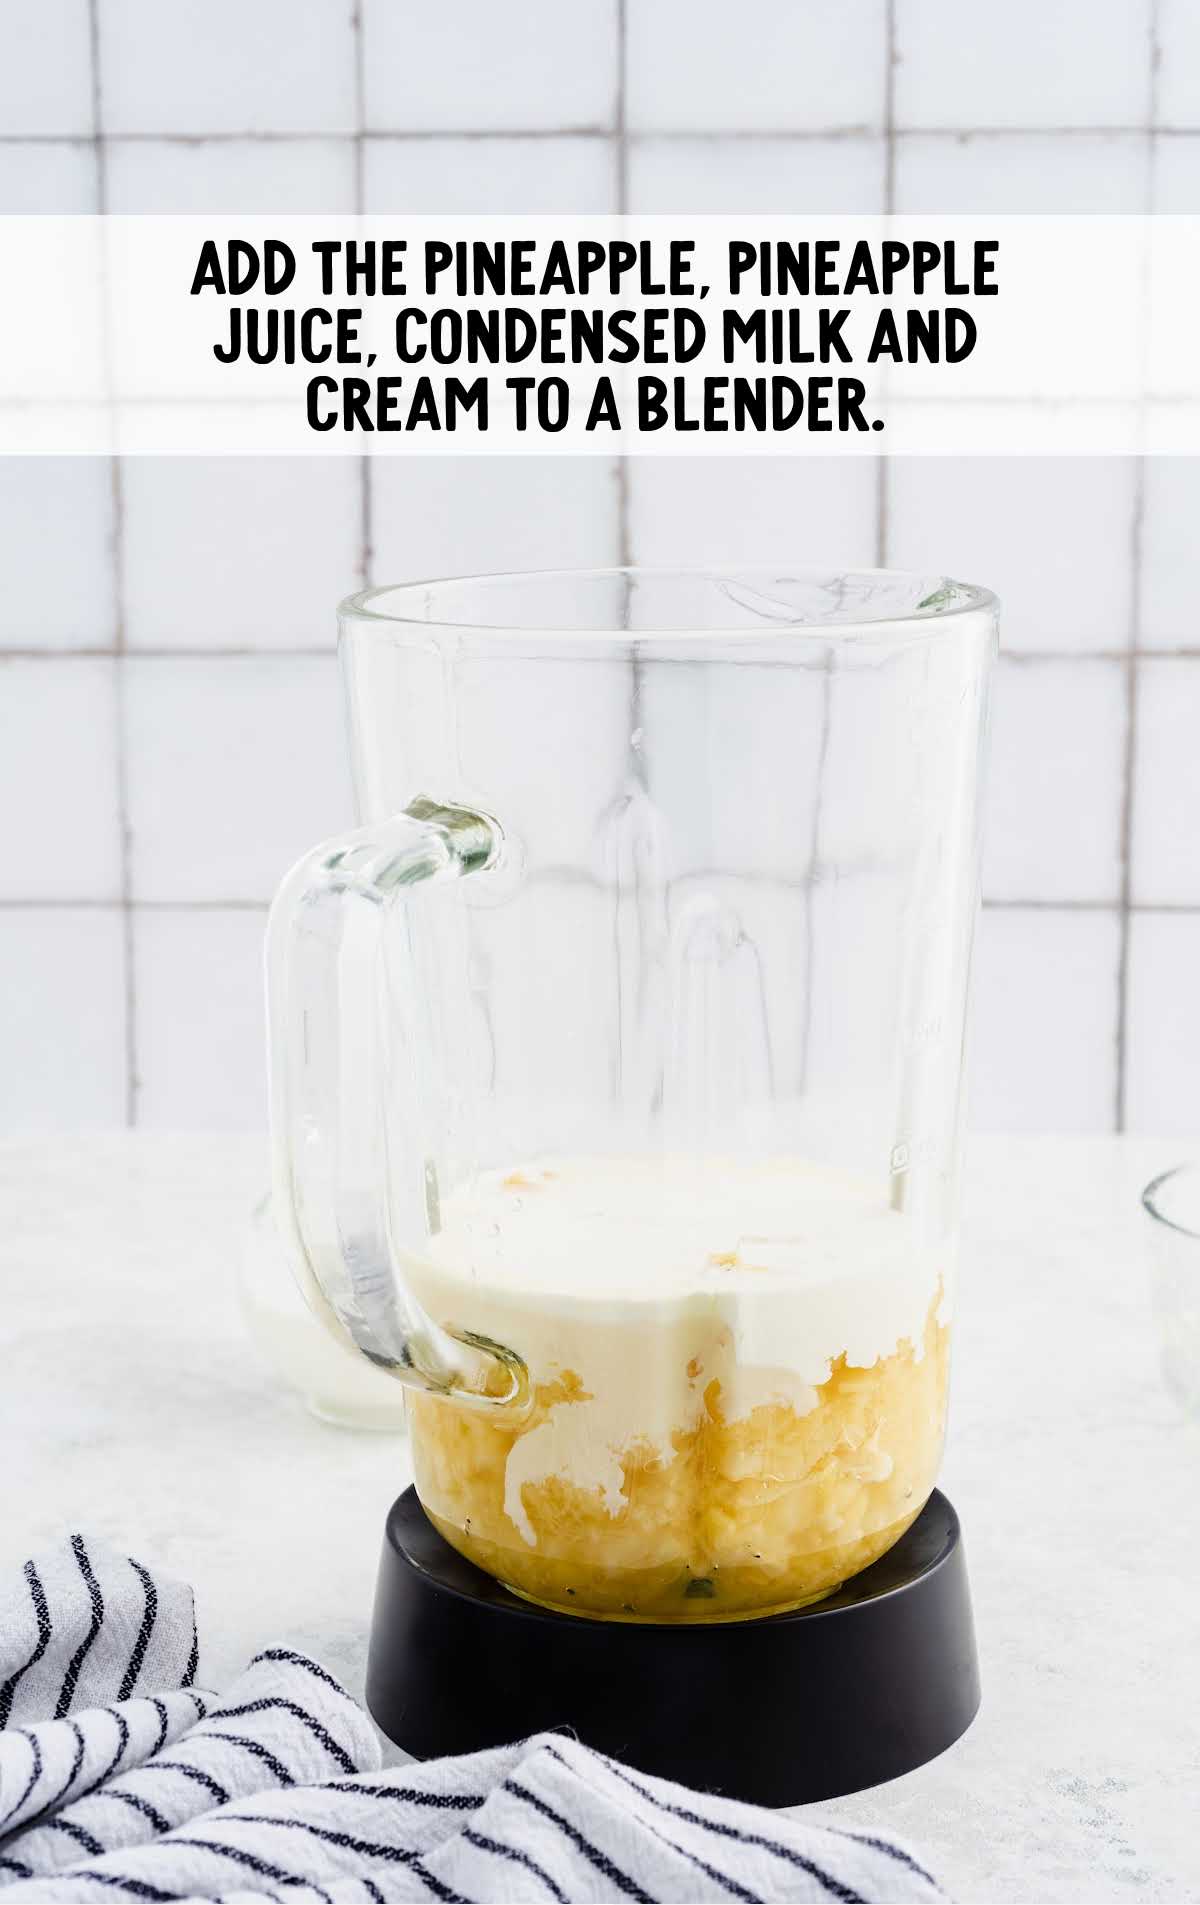 pineapple, pineapple juice, condensed milk, and cream added to a blender